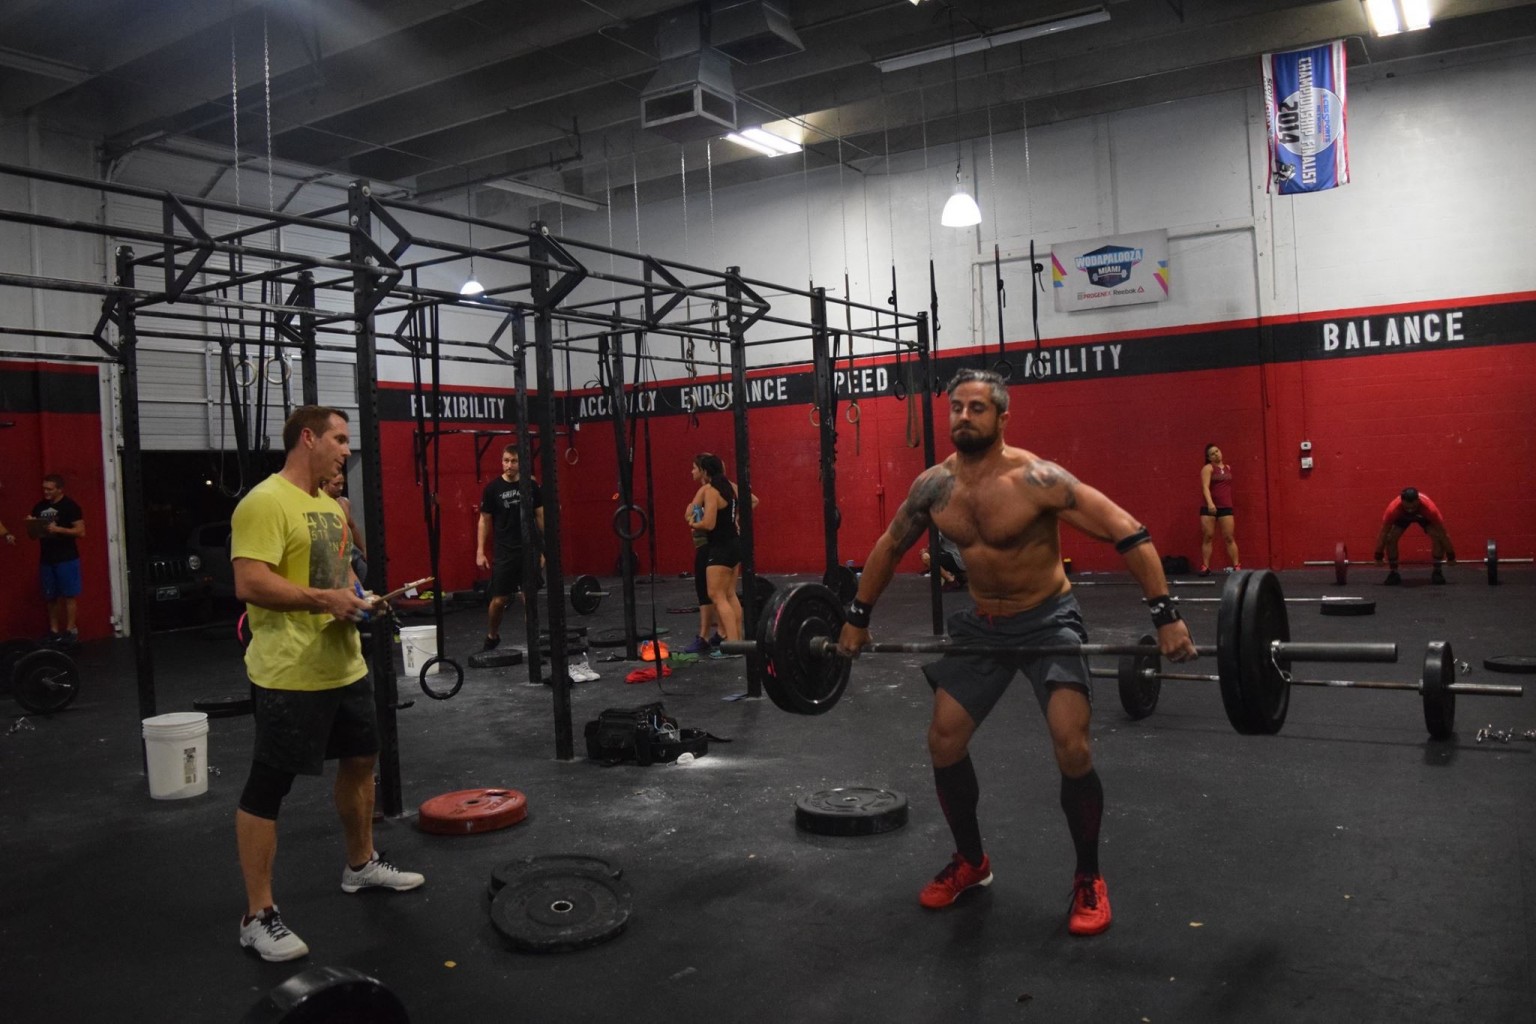 Started the Crossfit Open Last Friday